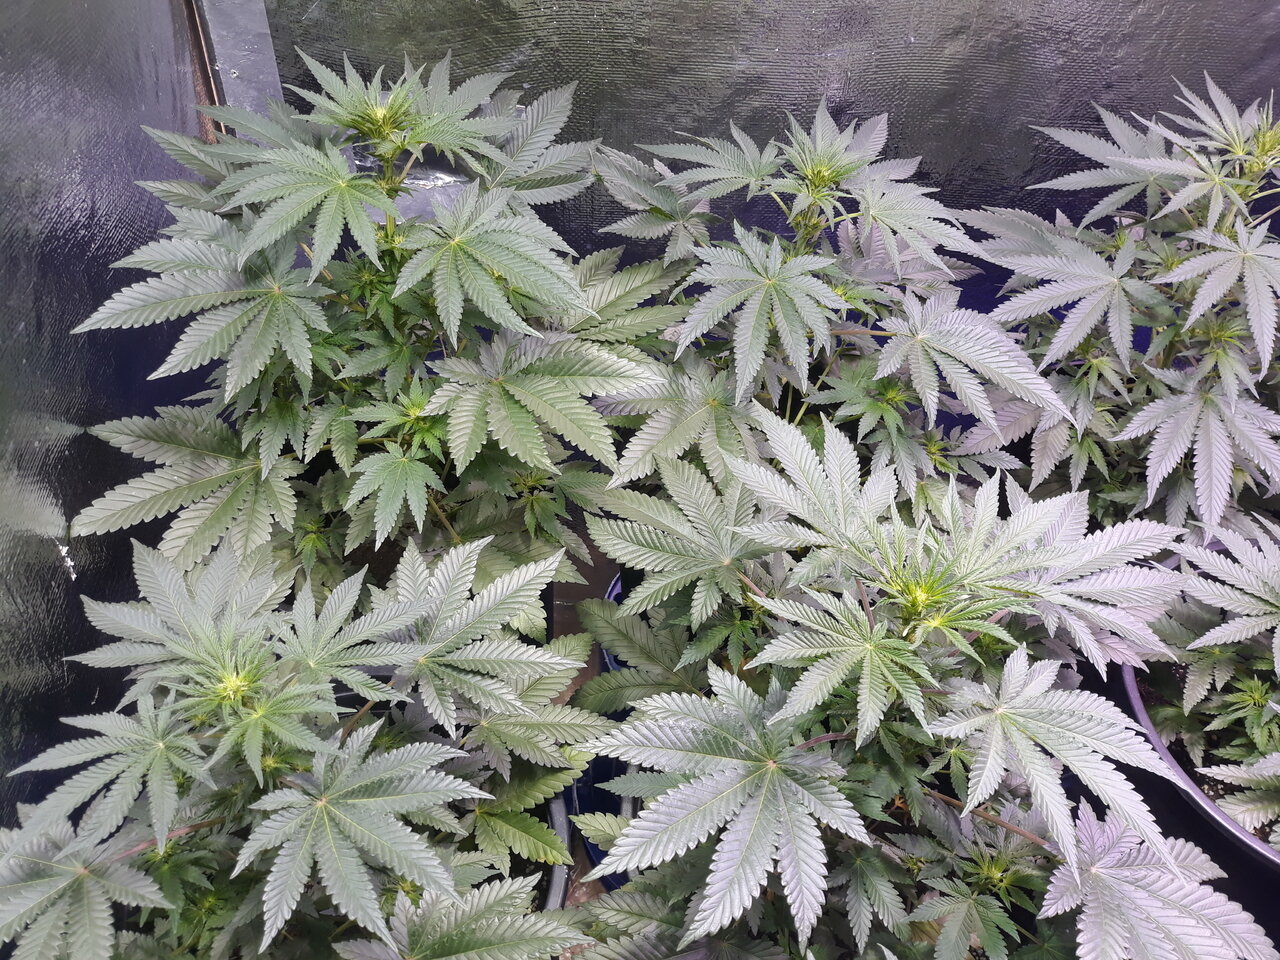 Day 16 looking more indica then all my other crops of same strain results of selfing.